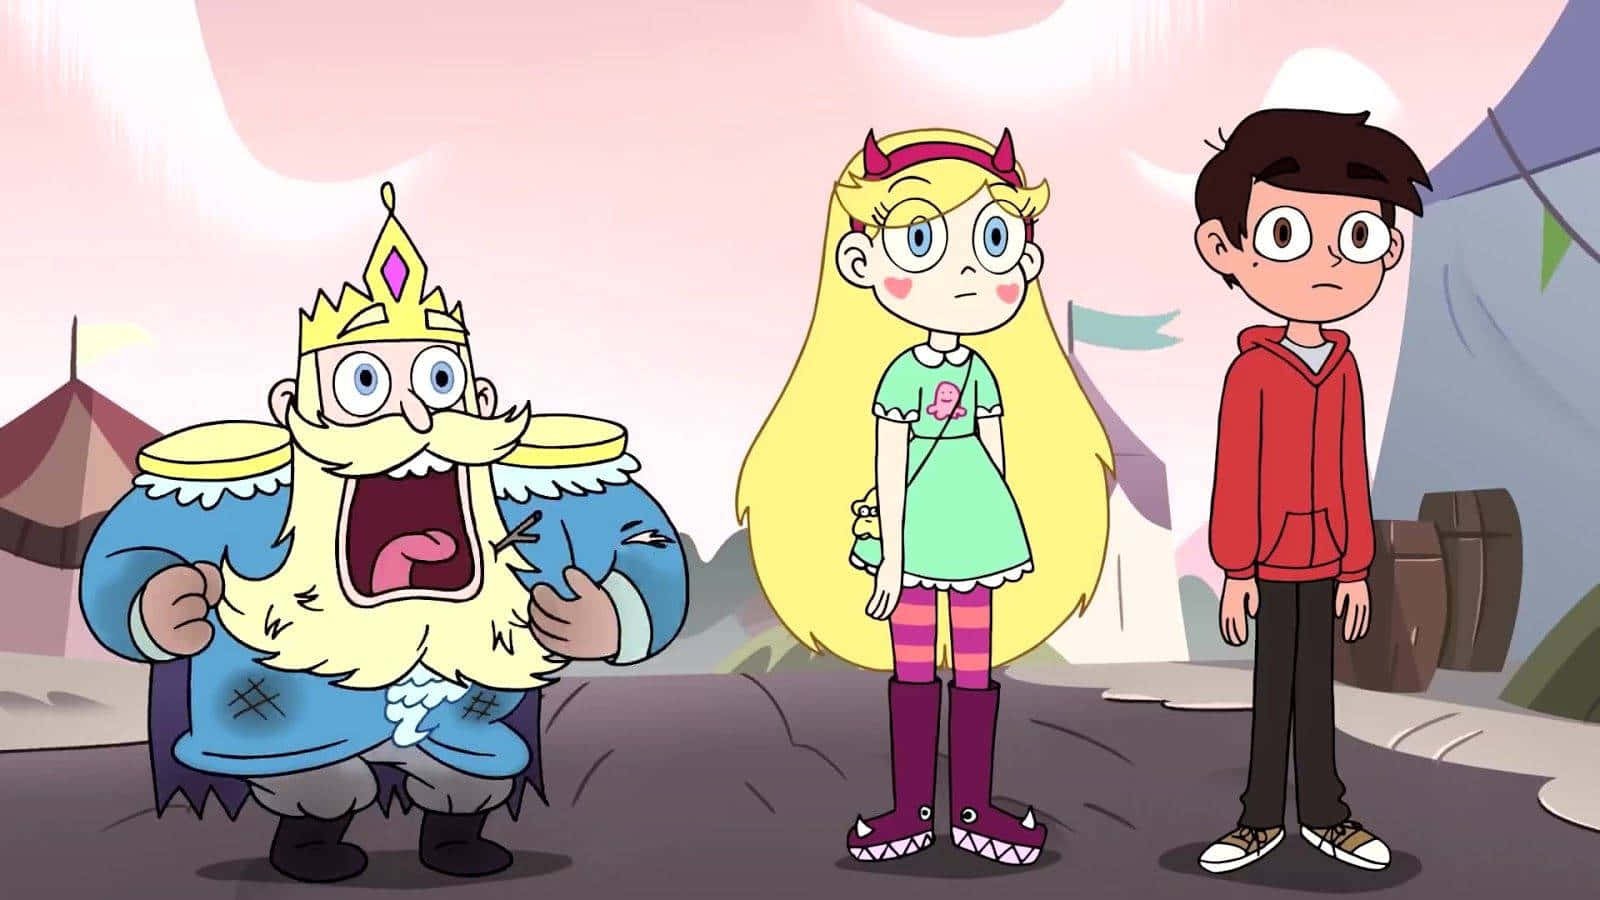 Star Butterfly and Marco Diaz Take on Evil Forces